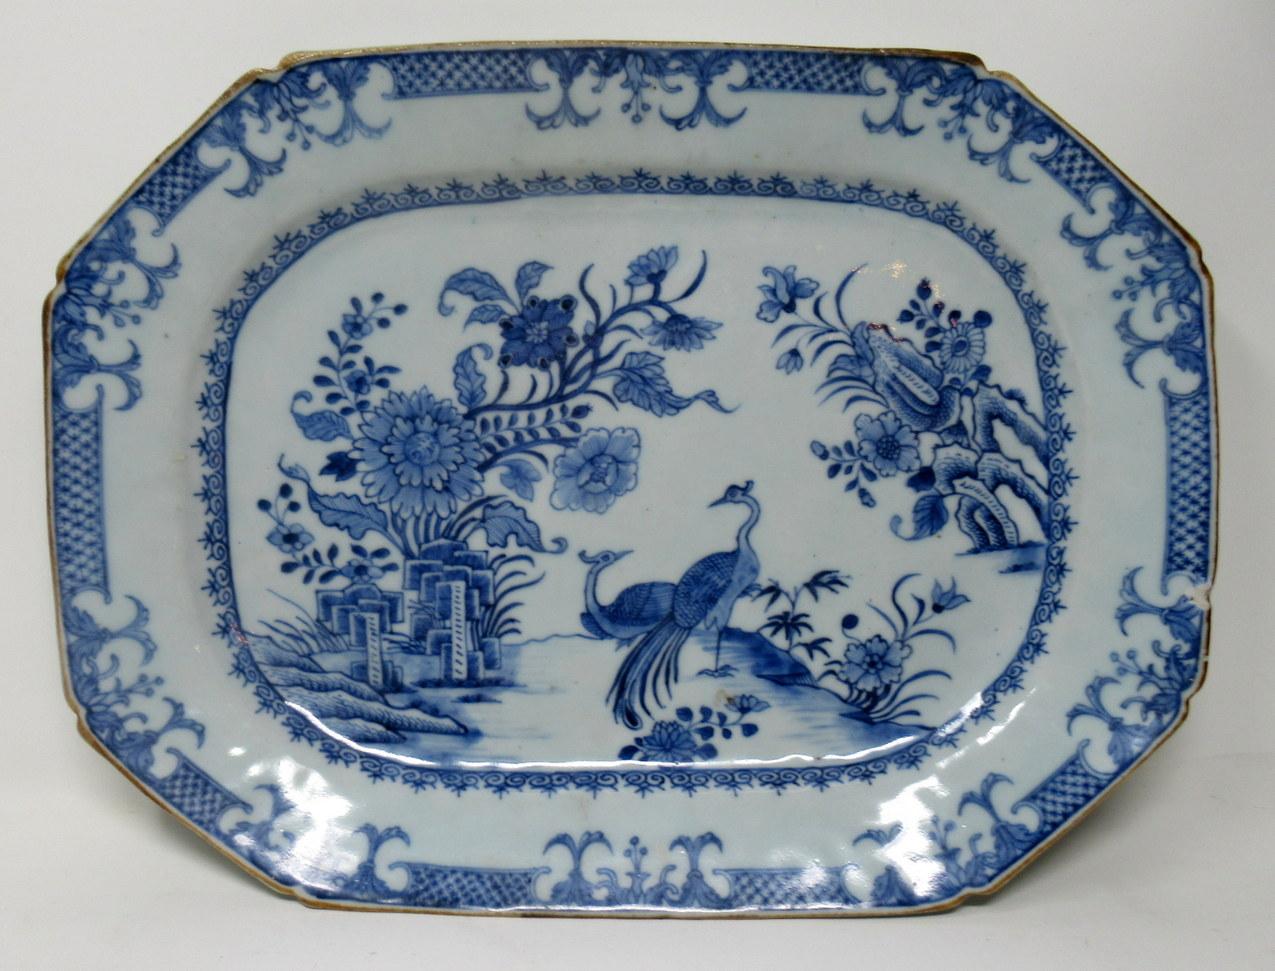 Pair of Chinese Hand Painted Export Dishes Qianlong Period 1711-1799

An exceptionally fine quality matched pair of hand decorated in underglaze blue on white ground Chinese serving dishes of shaped oval outline, last quarter of the 18th century,